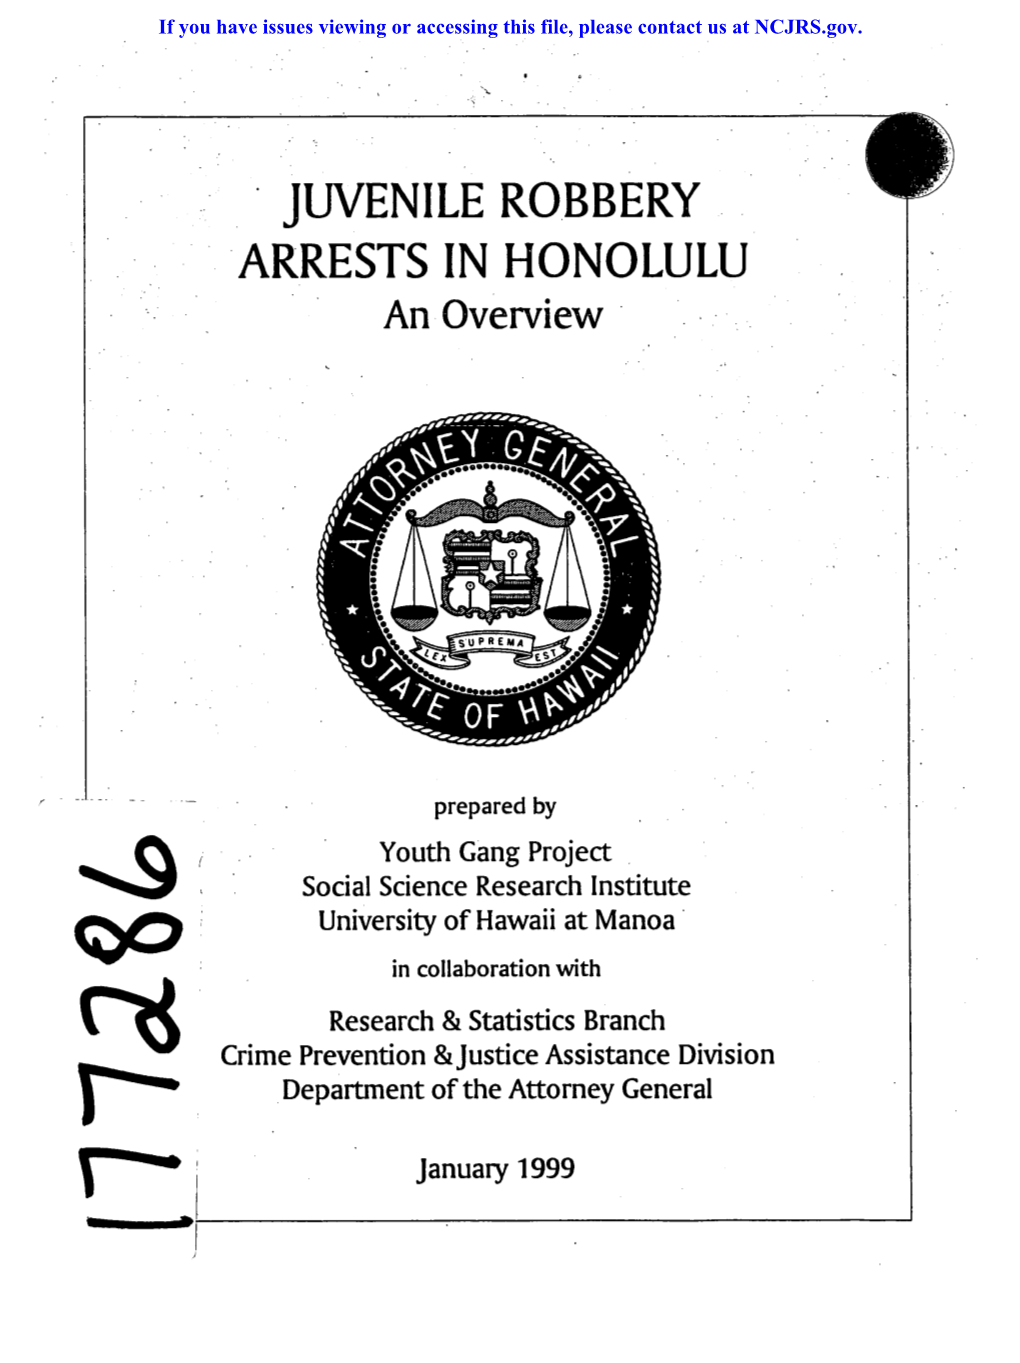 JUVENILE ROBBERY ARRESTS in HONOLULU an Overview